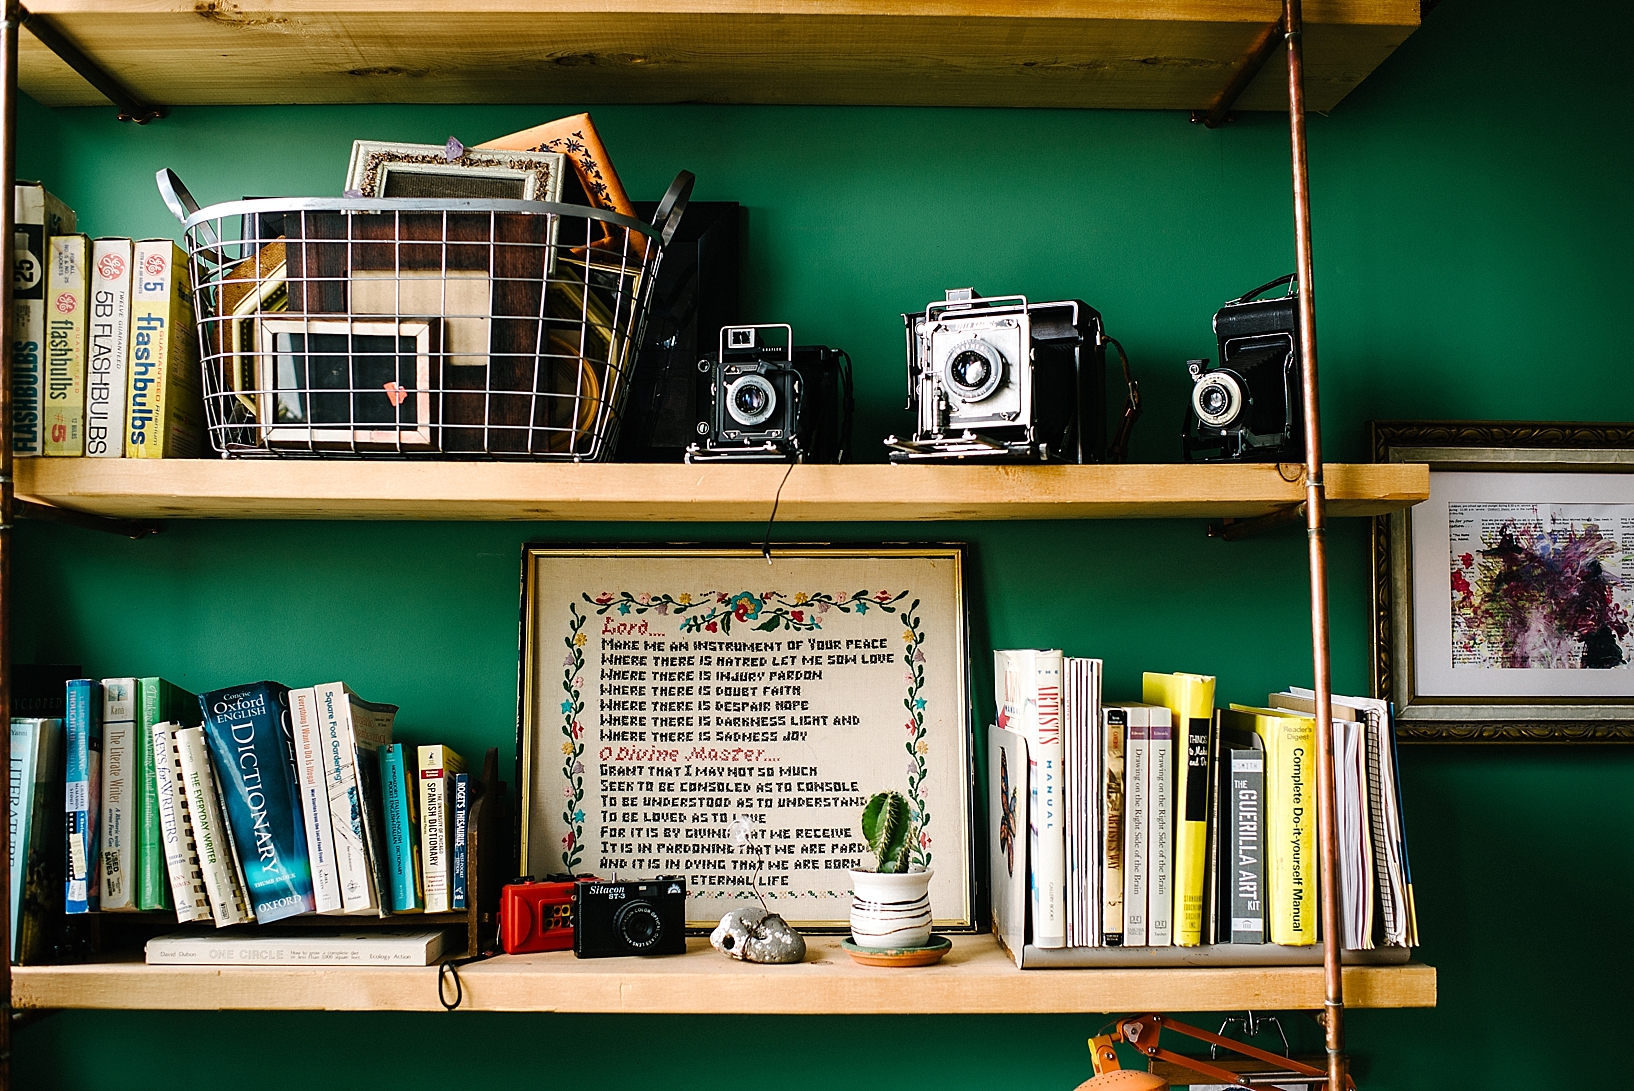 bookshelves in front of green wall with vintage cameras and books